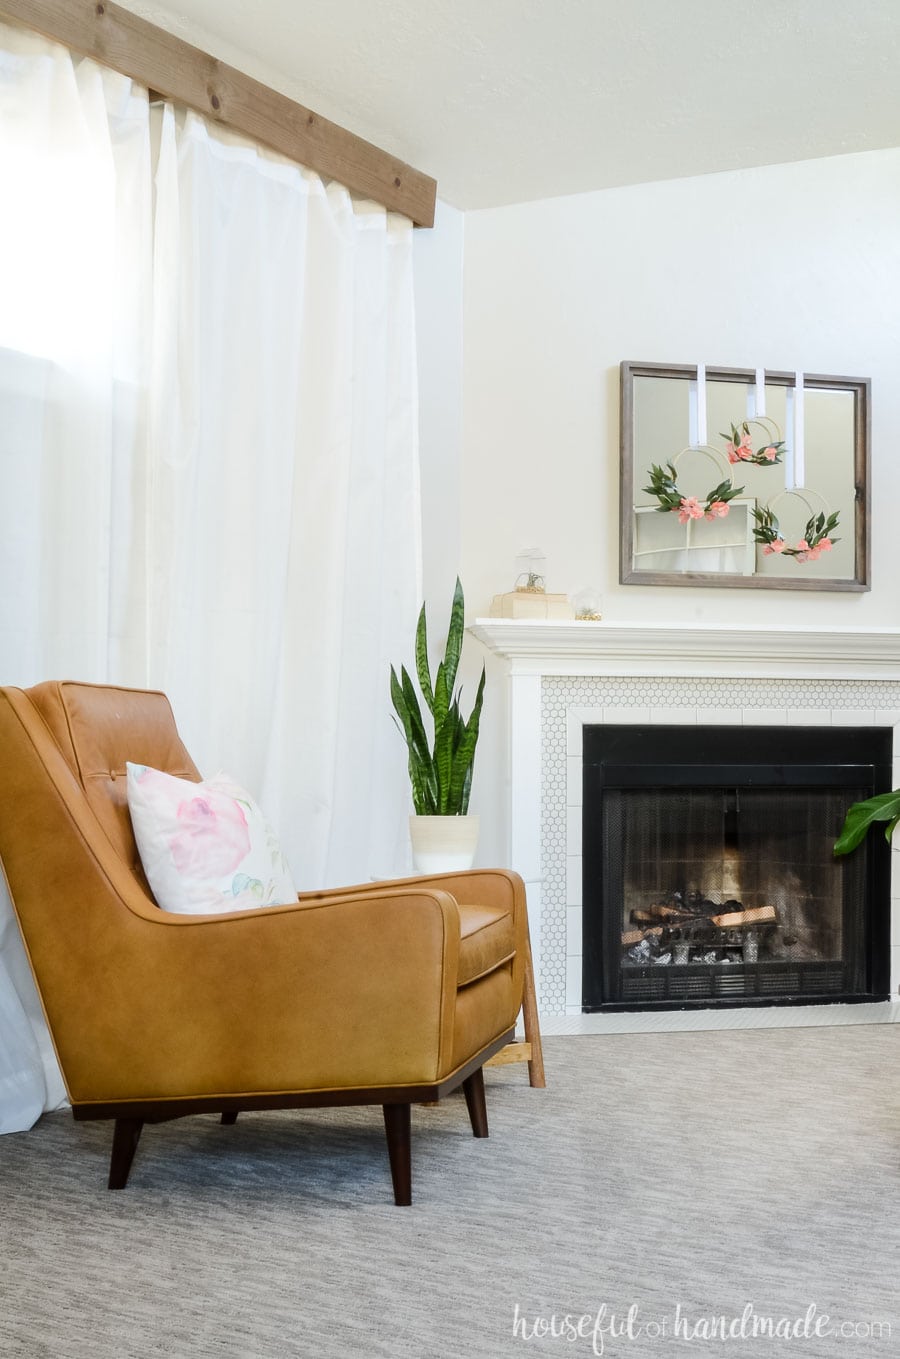 Tan leather armchair in front of a vintage inspired fireplace. See how we updated our living room for spring on a budget. Housefulofhandmade.com